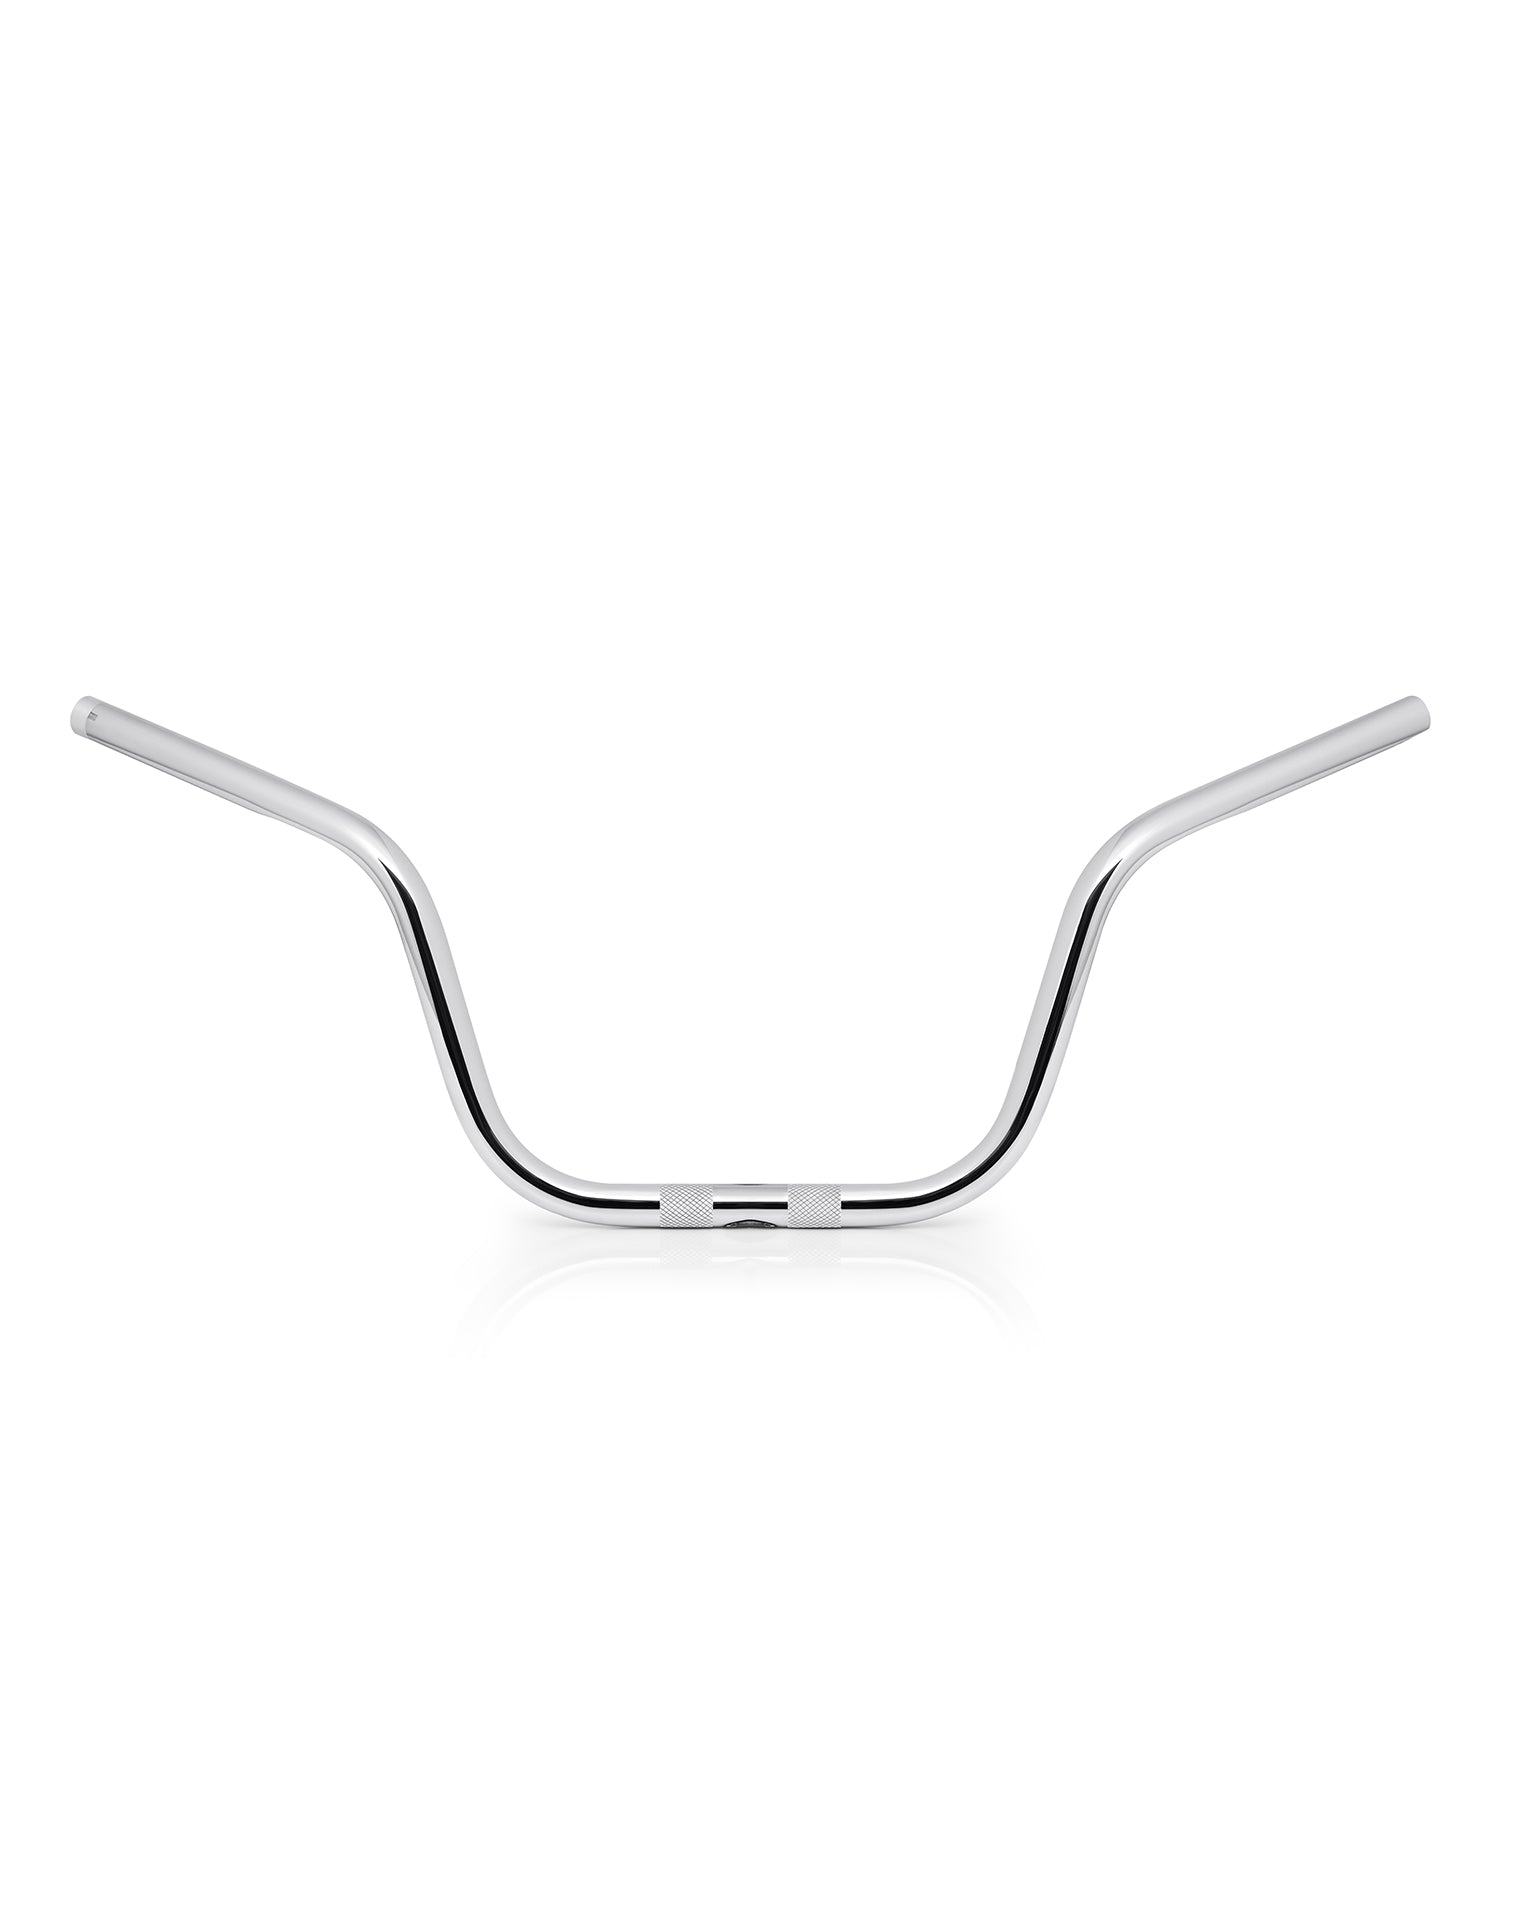 Viking Iron Born Voyage 12" Handlebar for Harley Road Glide FLTR/X Chrome Front View